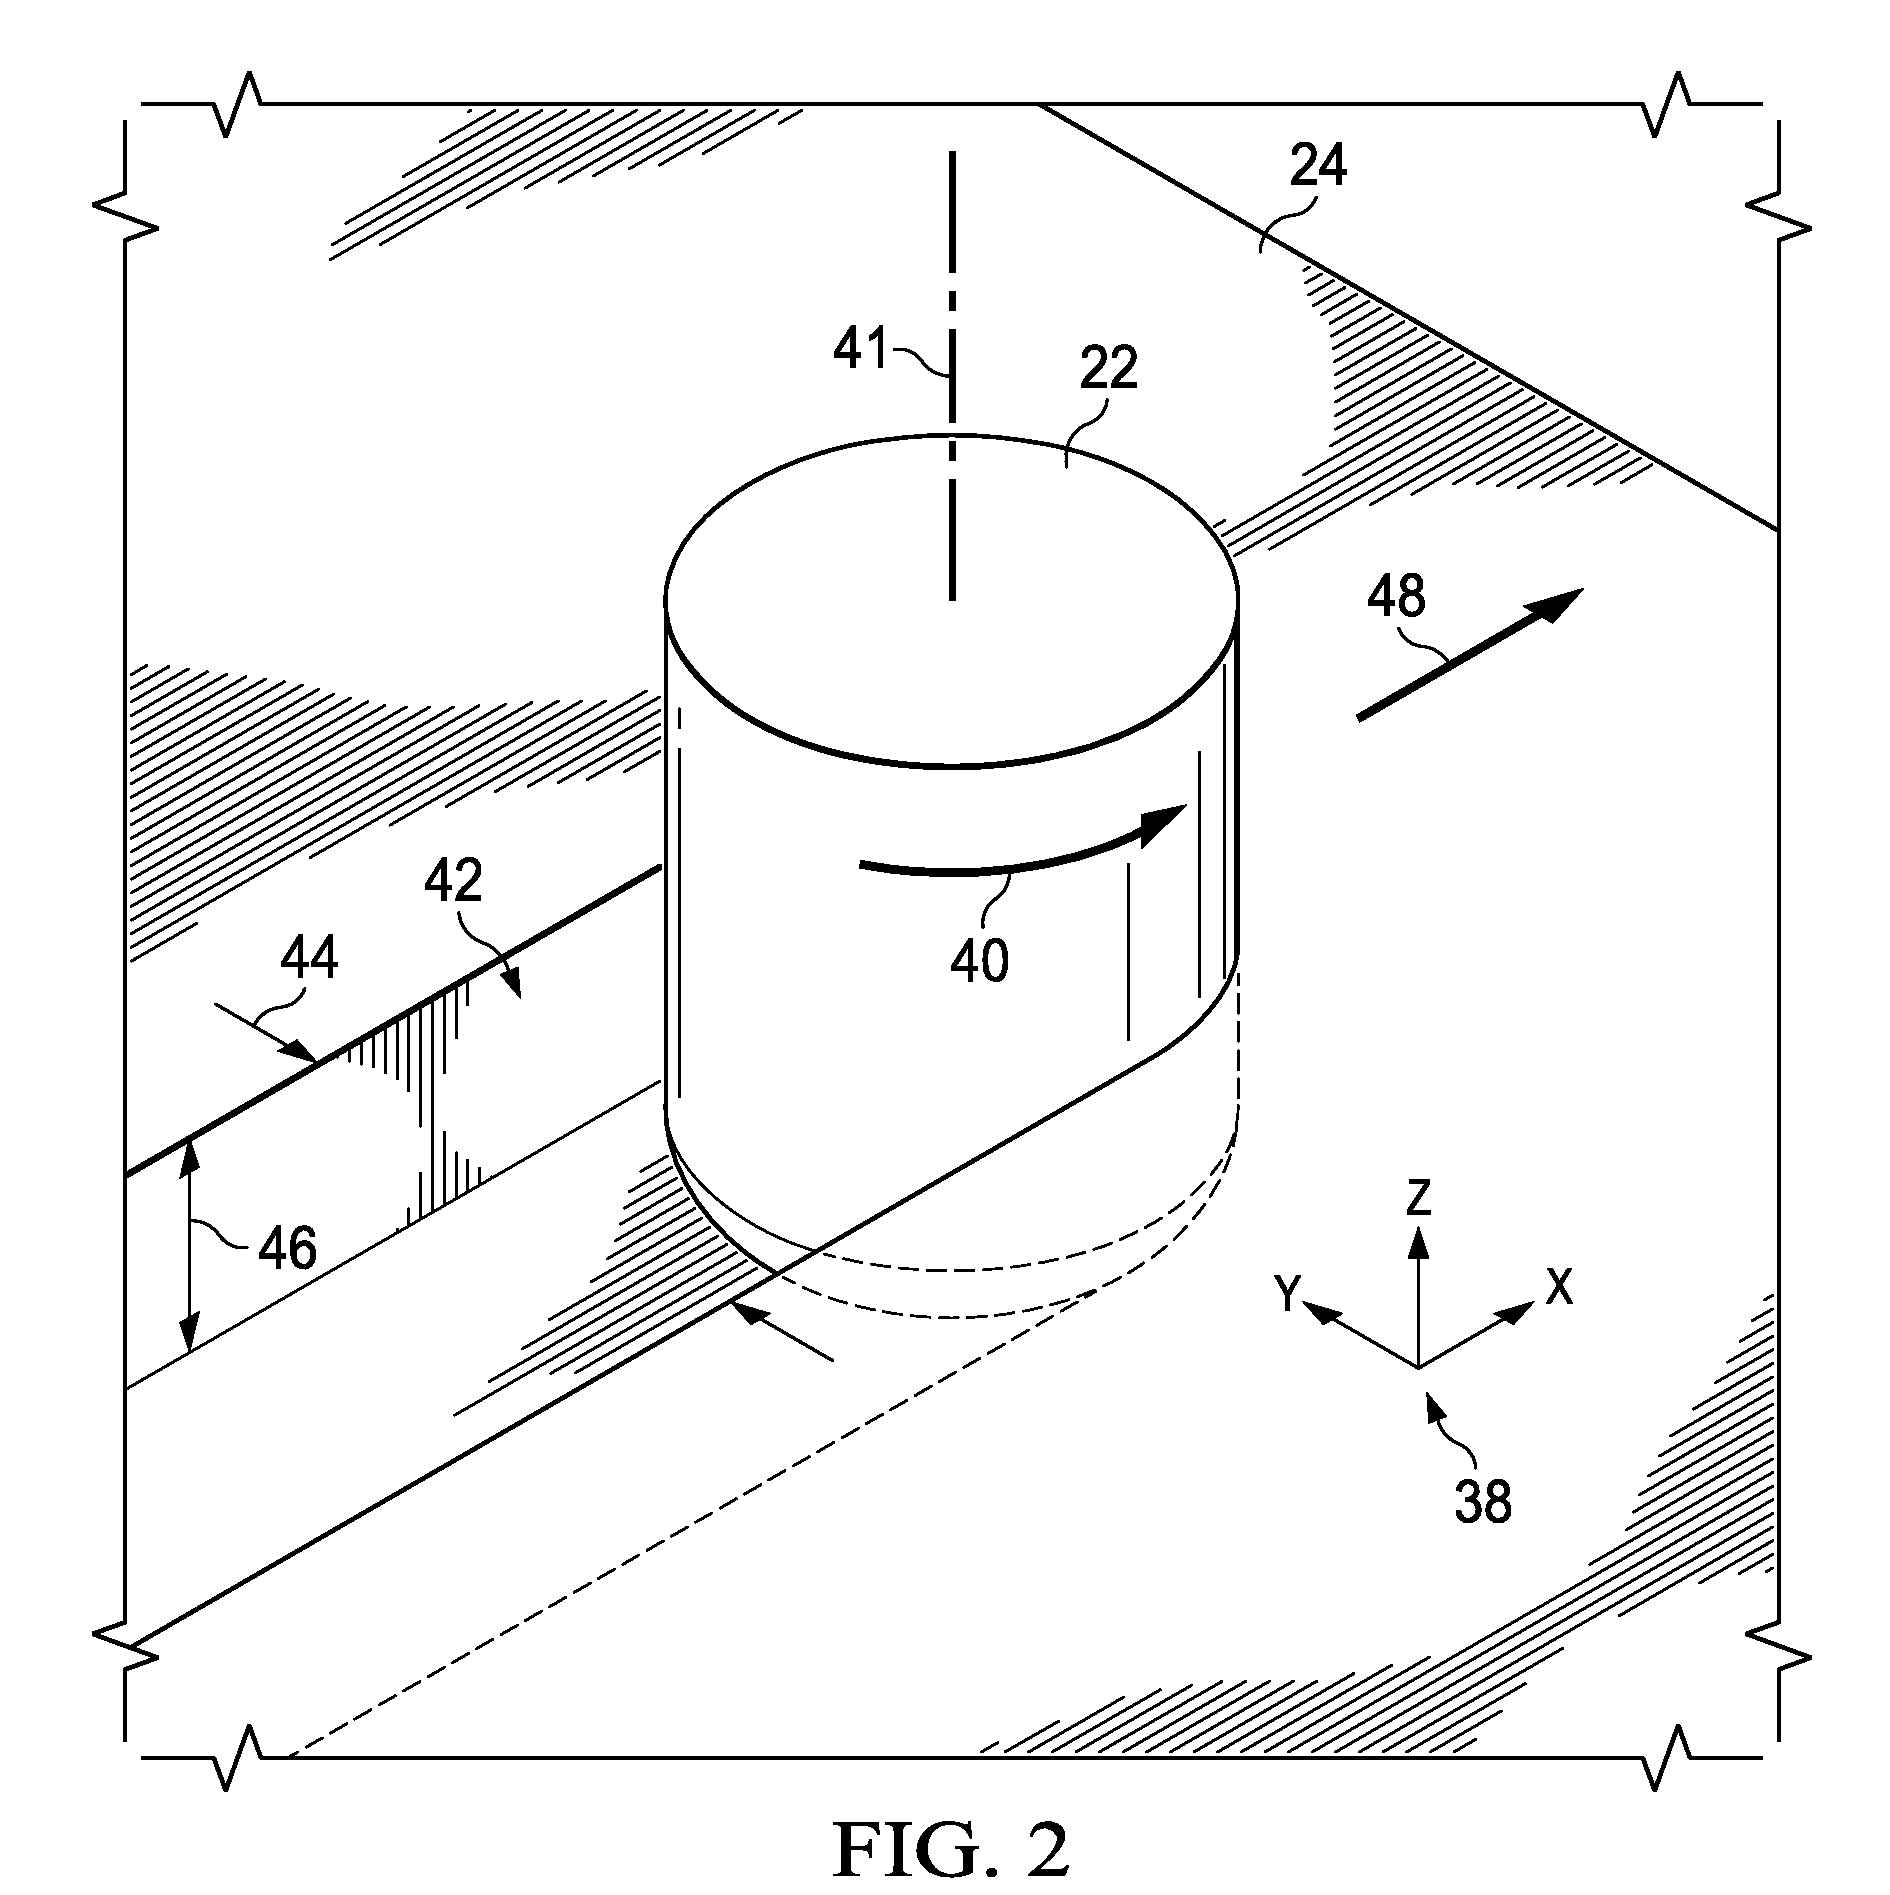 Method of optimizing toolpaths using medial axis transformation